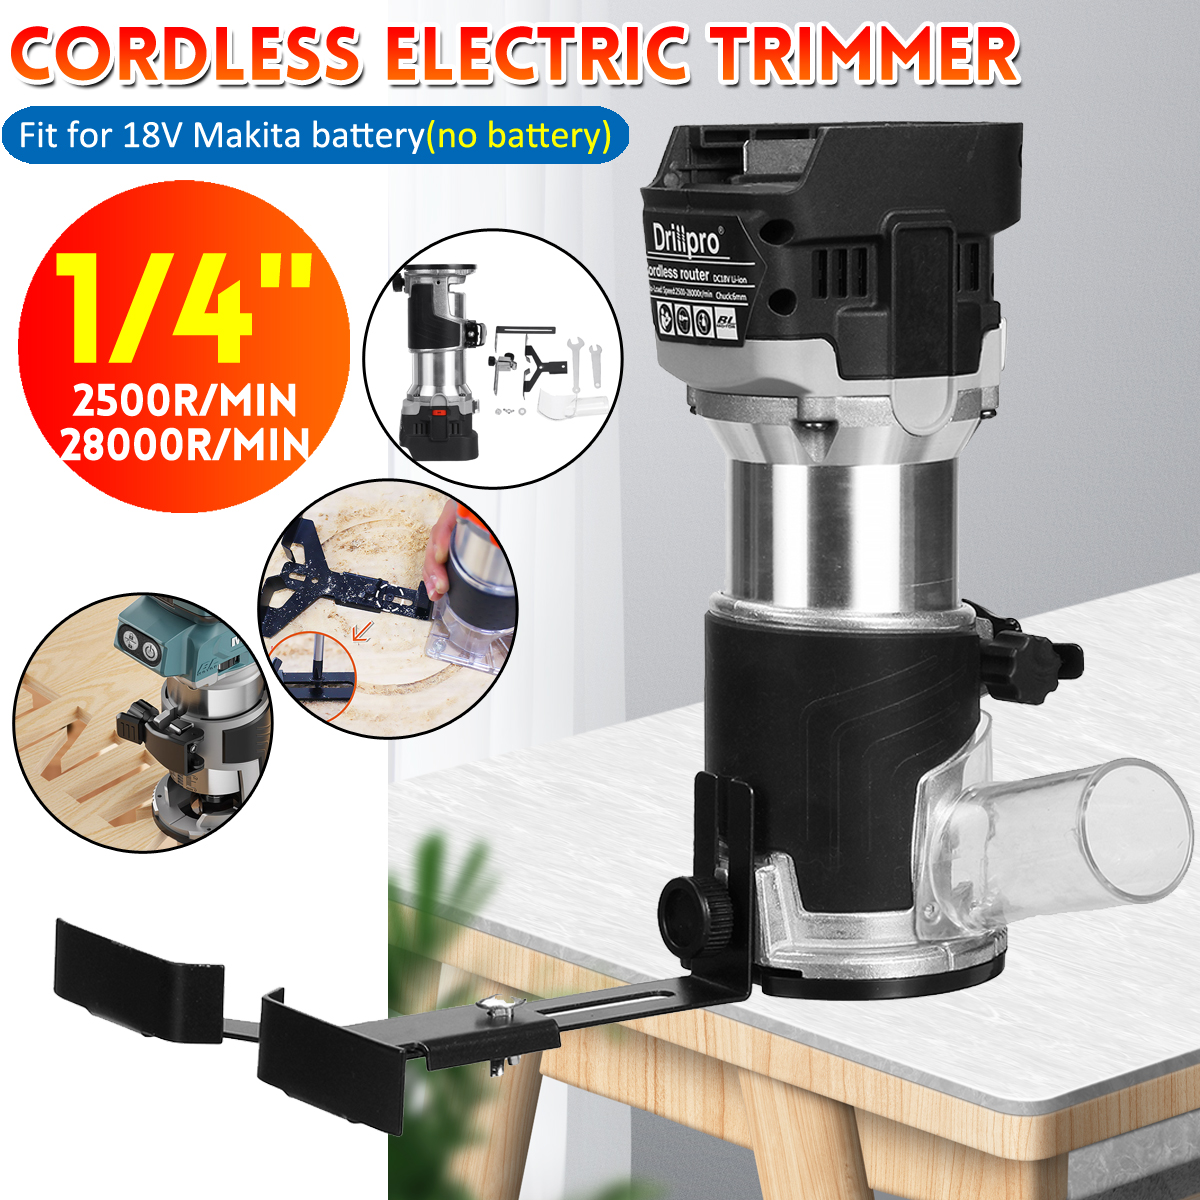 Drillpro-Cordless-Electric-Hand-Trimmer-Wood-Trimming-Machine-Wood-Router-For-Makita-18V-Battery-Por-1860870-2